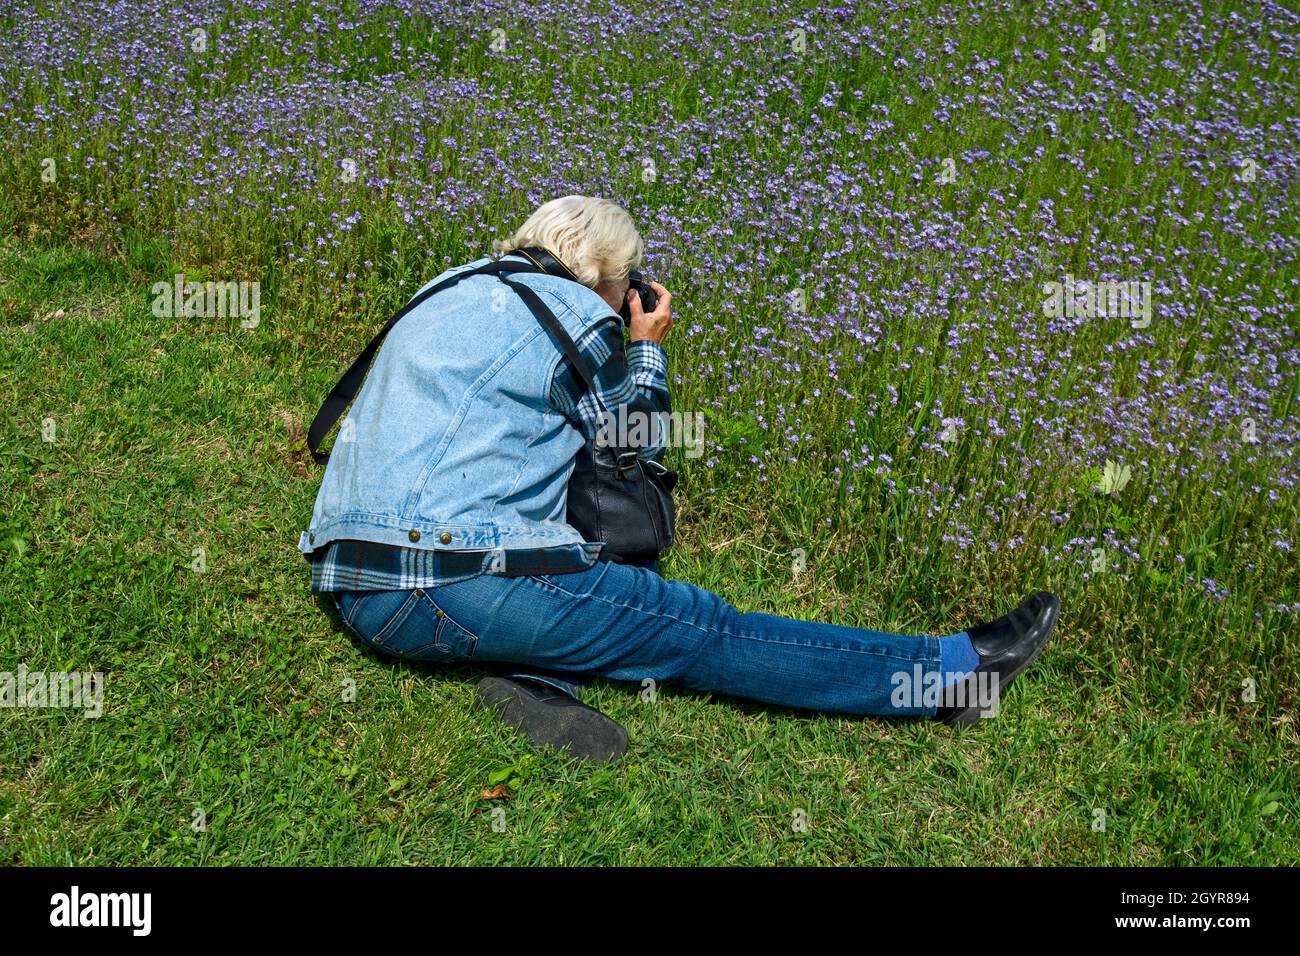 Woman photographs the plant Phacelia tanacetifolia and bees that diligently collect pollen. Stock Photo